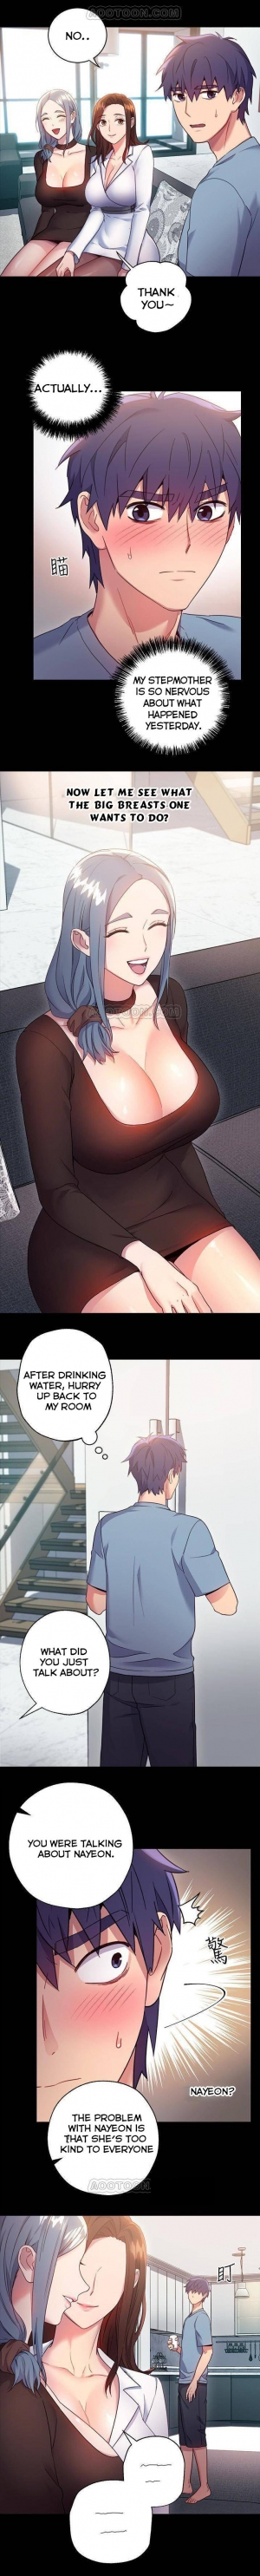  [Neck Pilllow] Stepmother Friends Ch.39/? [English] [Hentai Universe] NEW! 13/10/2020  - Page 109